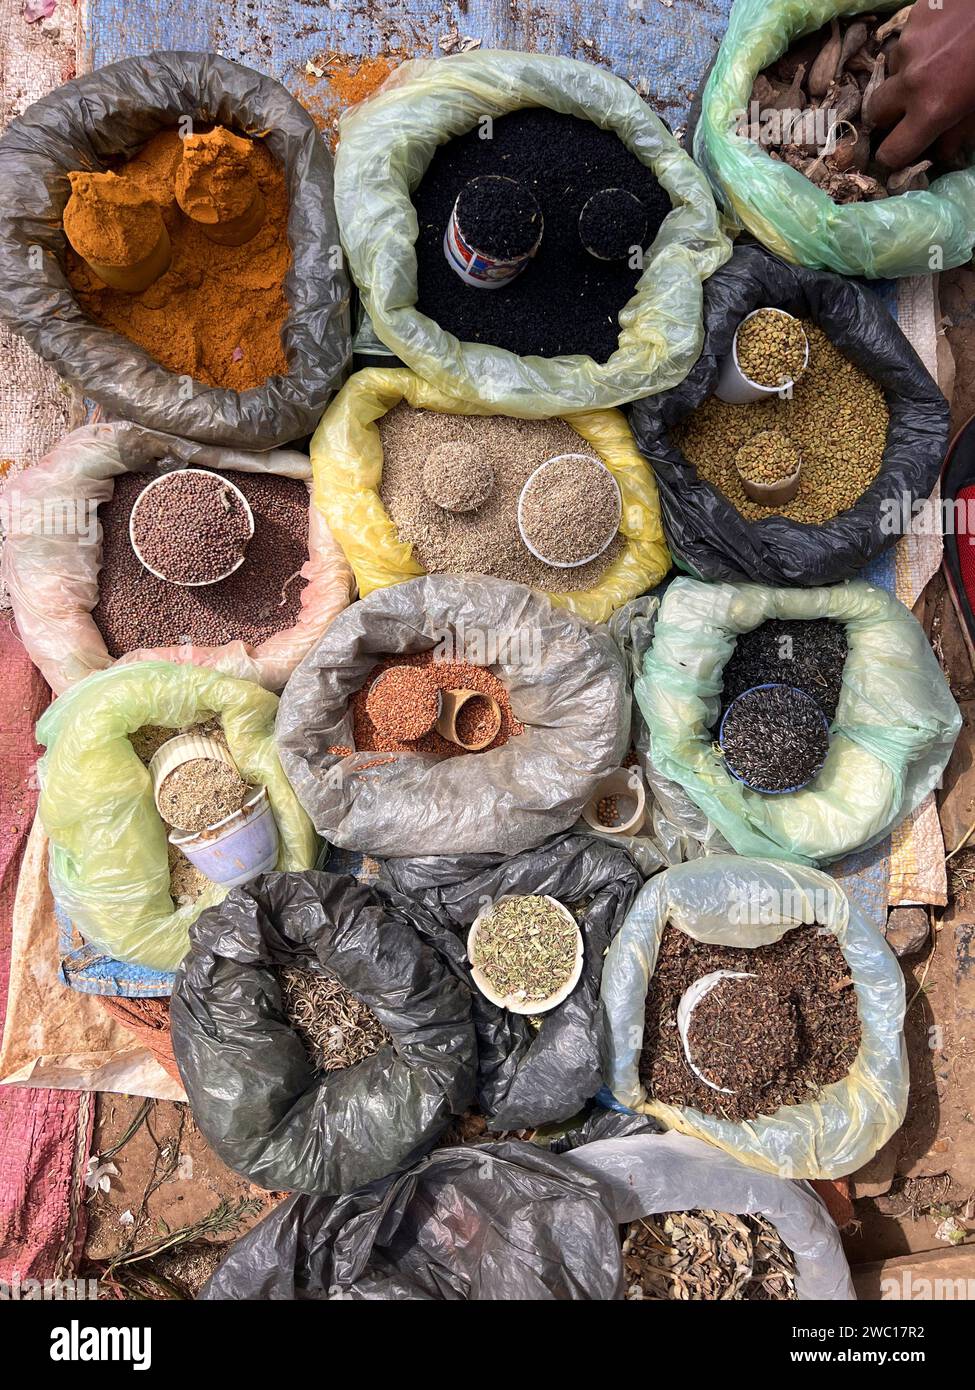 bulk spice in plastic bags at a market in Ethiopia. Stock Photo